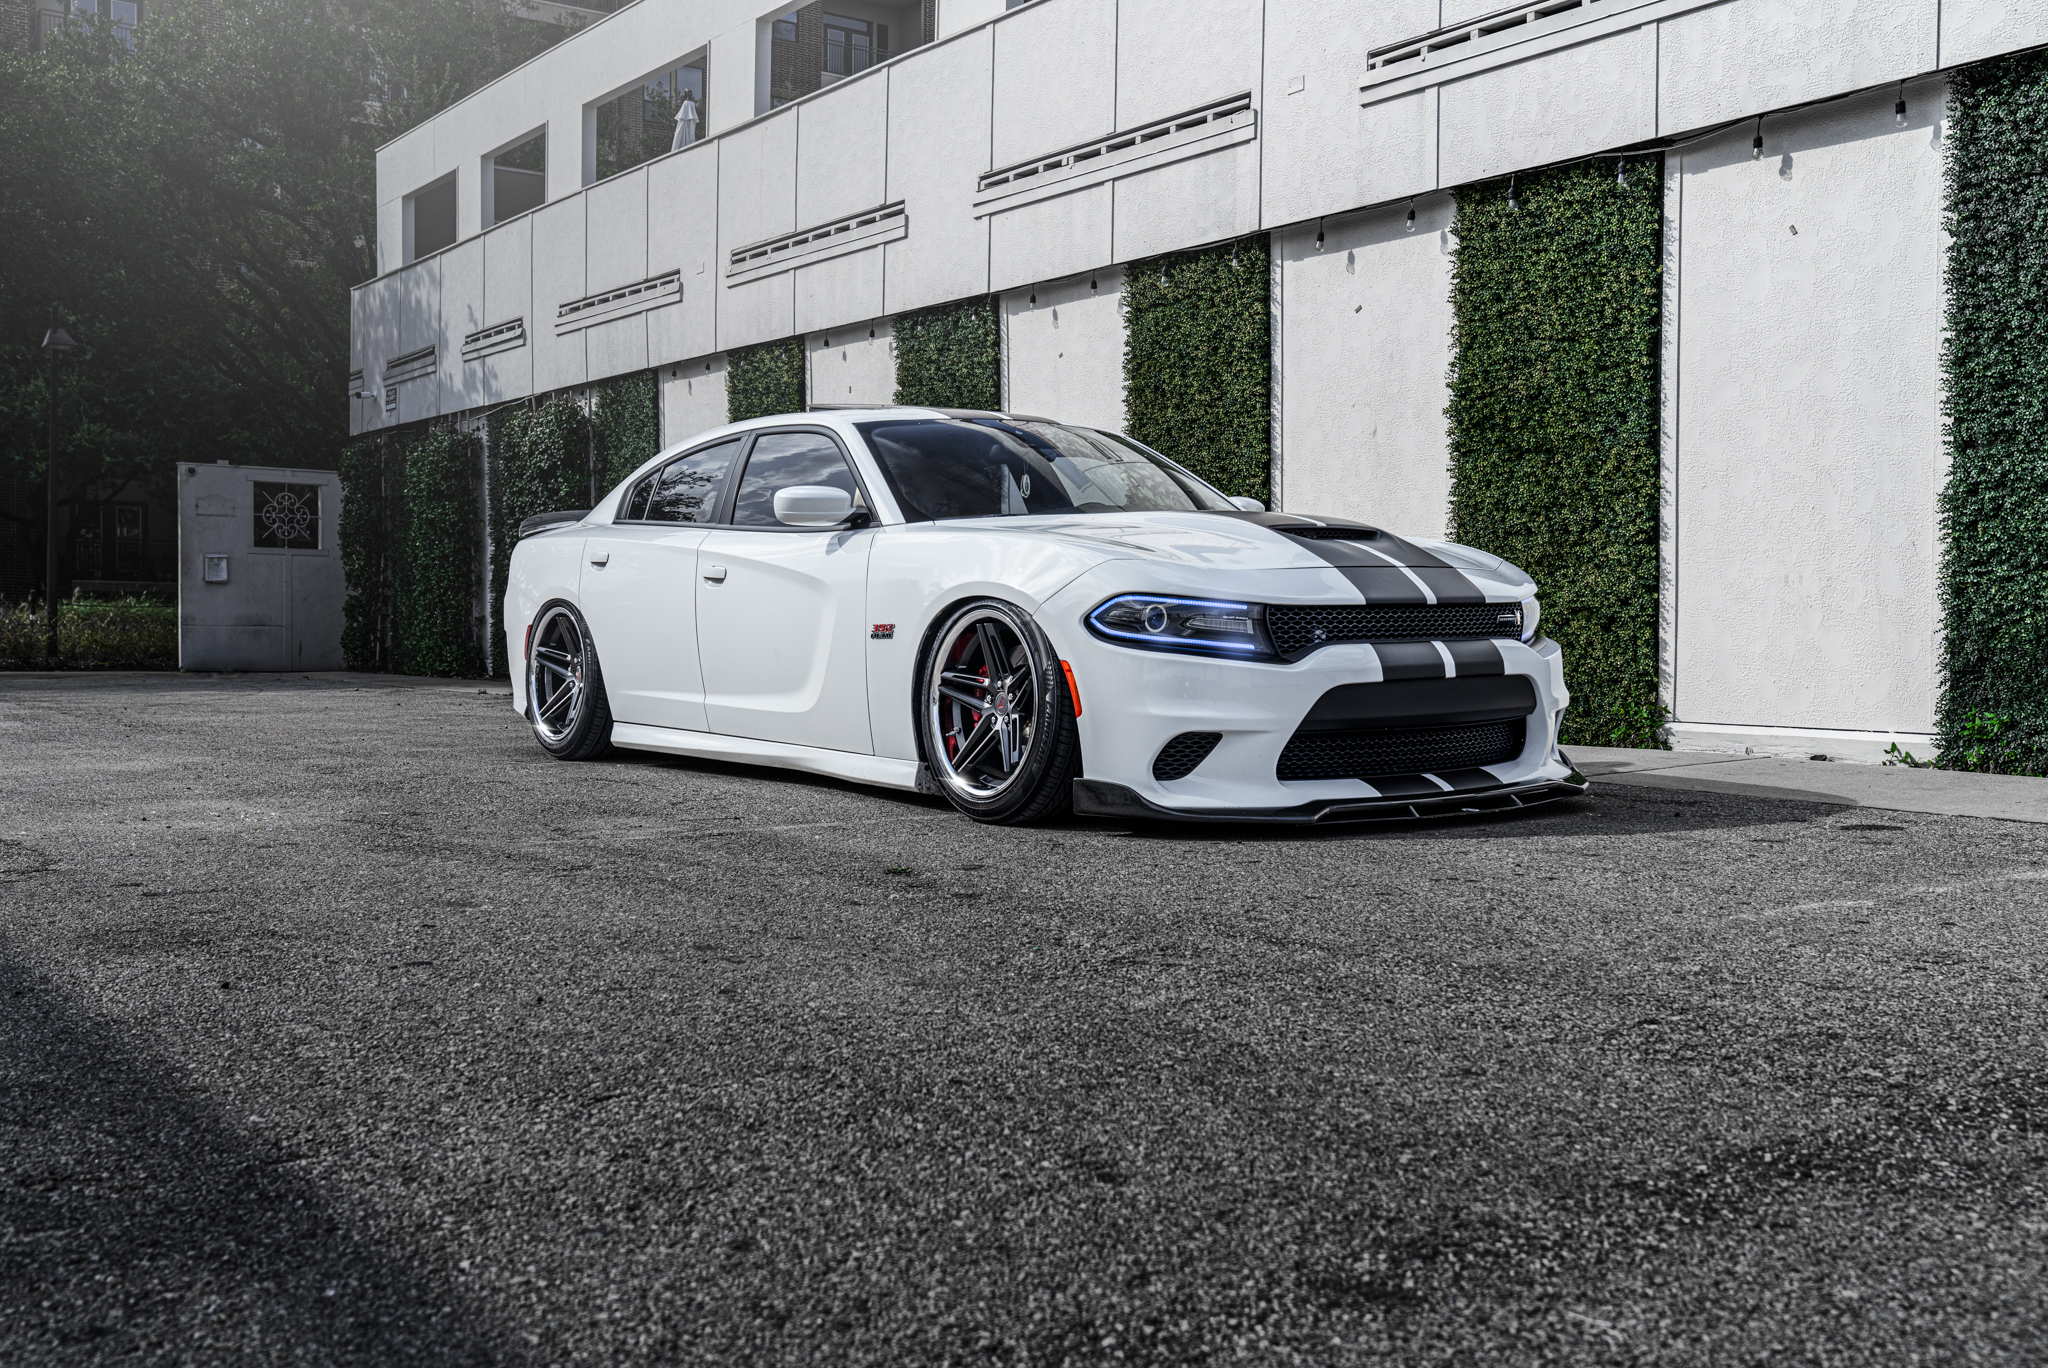 2019 Dodge Charger Scatpack - CM1 MGC - 20 inch-5